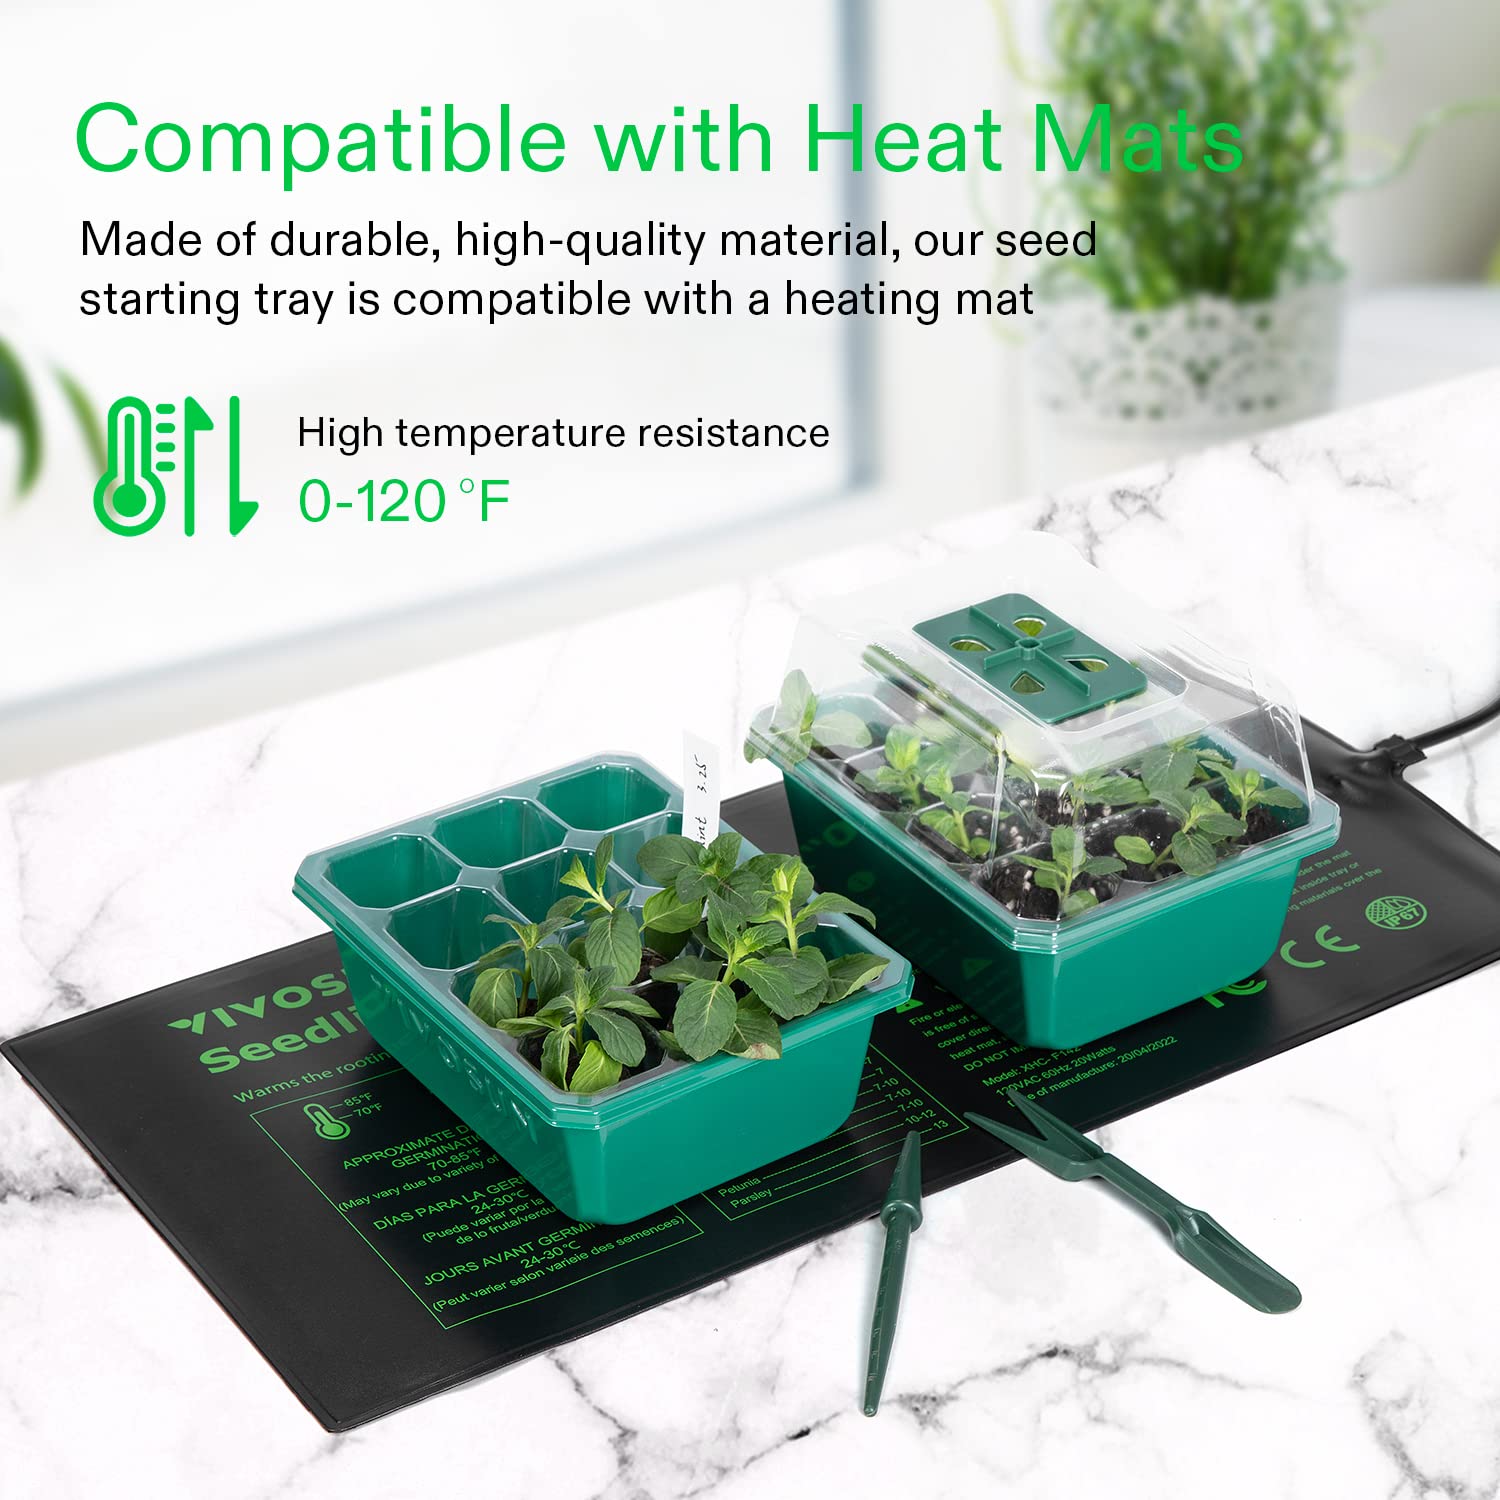 VIVOSUN 6-Pack Seed Starter Trays, 72-Cell Seed Starter Kit with Humidity Dome, Flat Reusable Plant Germination Trays with Drain Hole, Green Propagation Tray for Planting Seeds